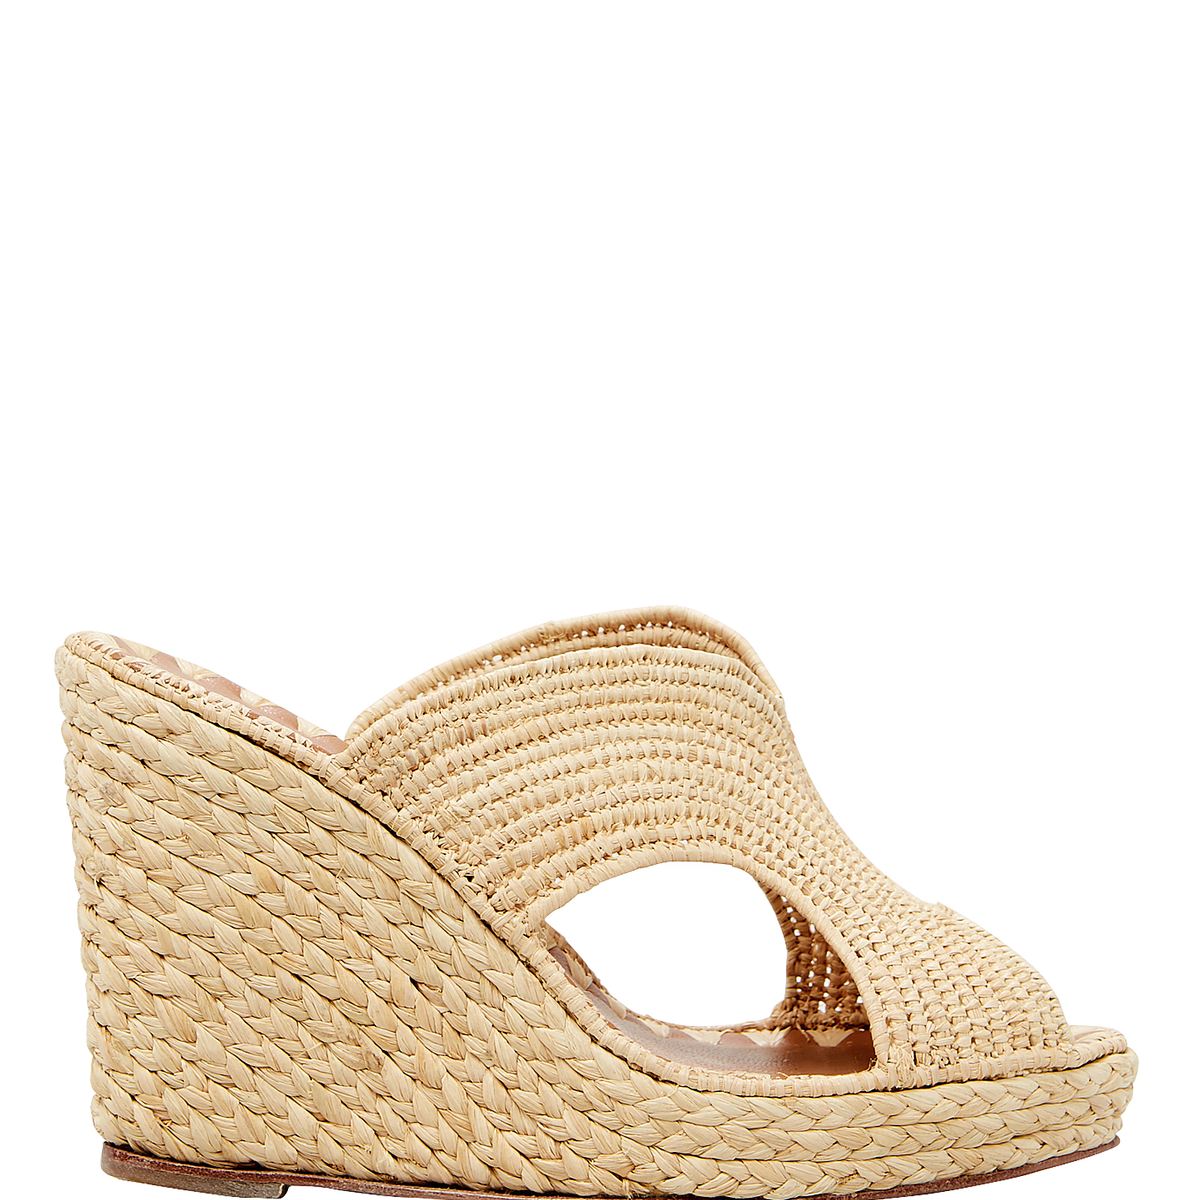 Carrie Forbes Lina Raffia Wedge Sandals | INTERMIX®